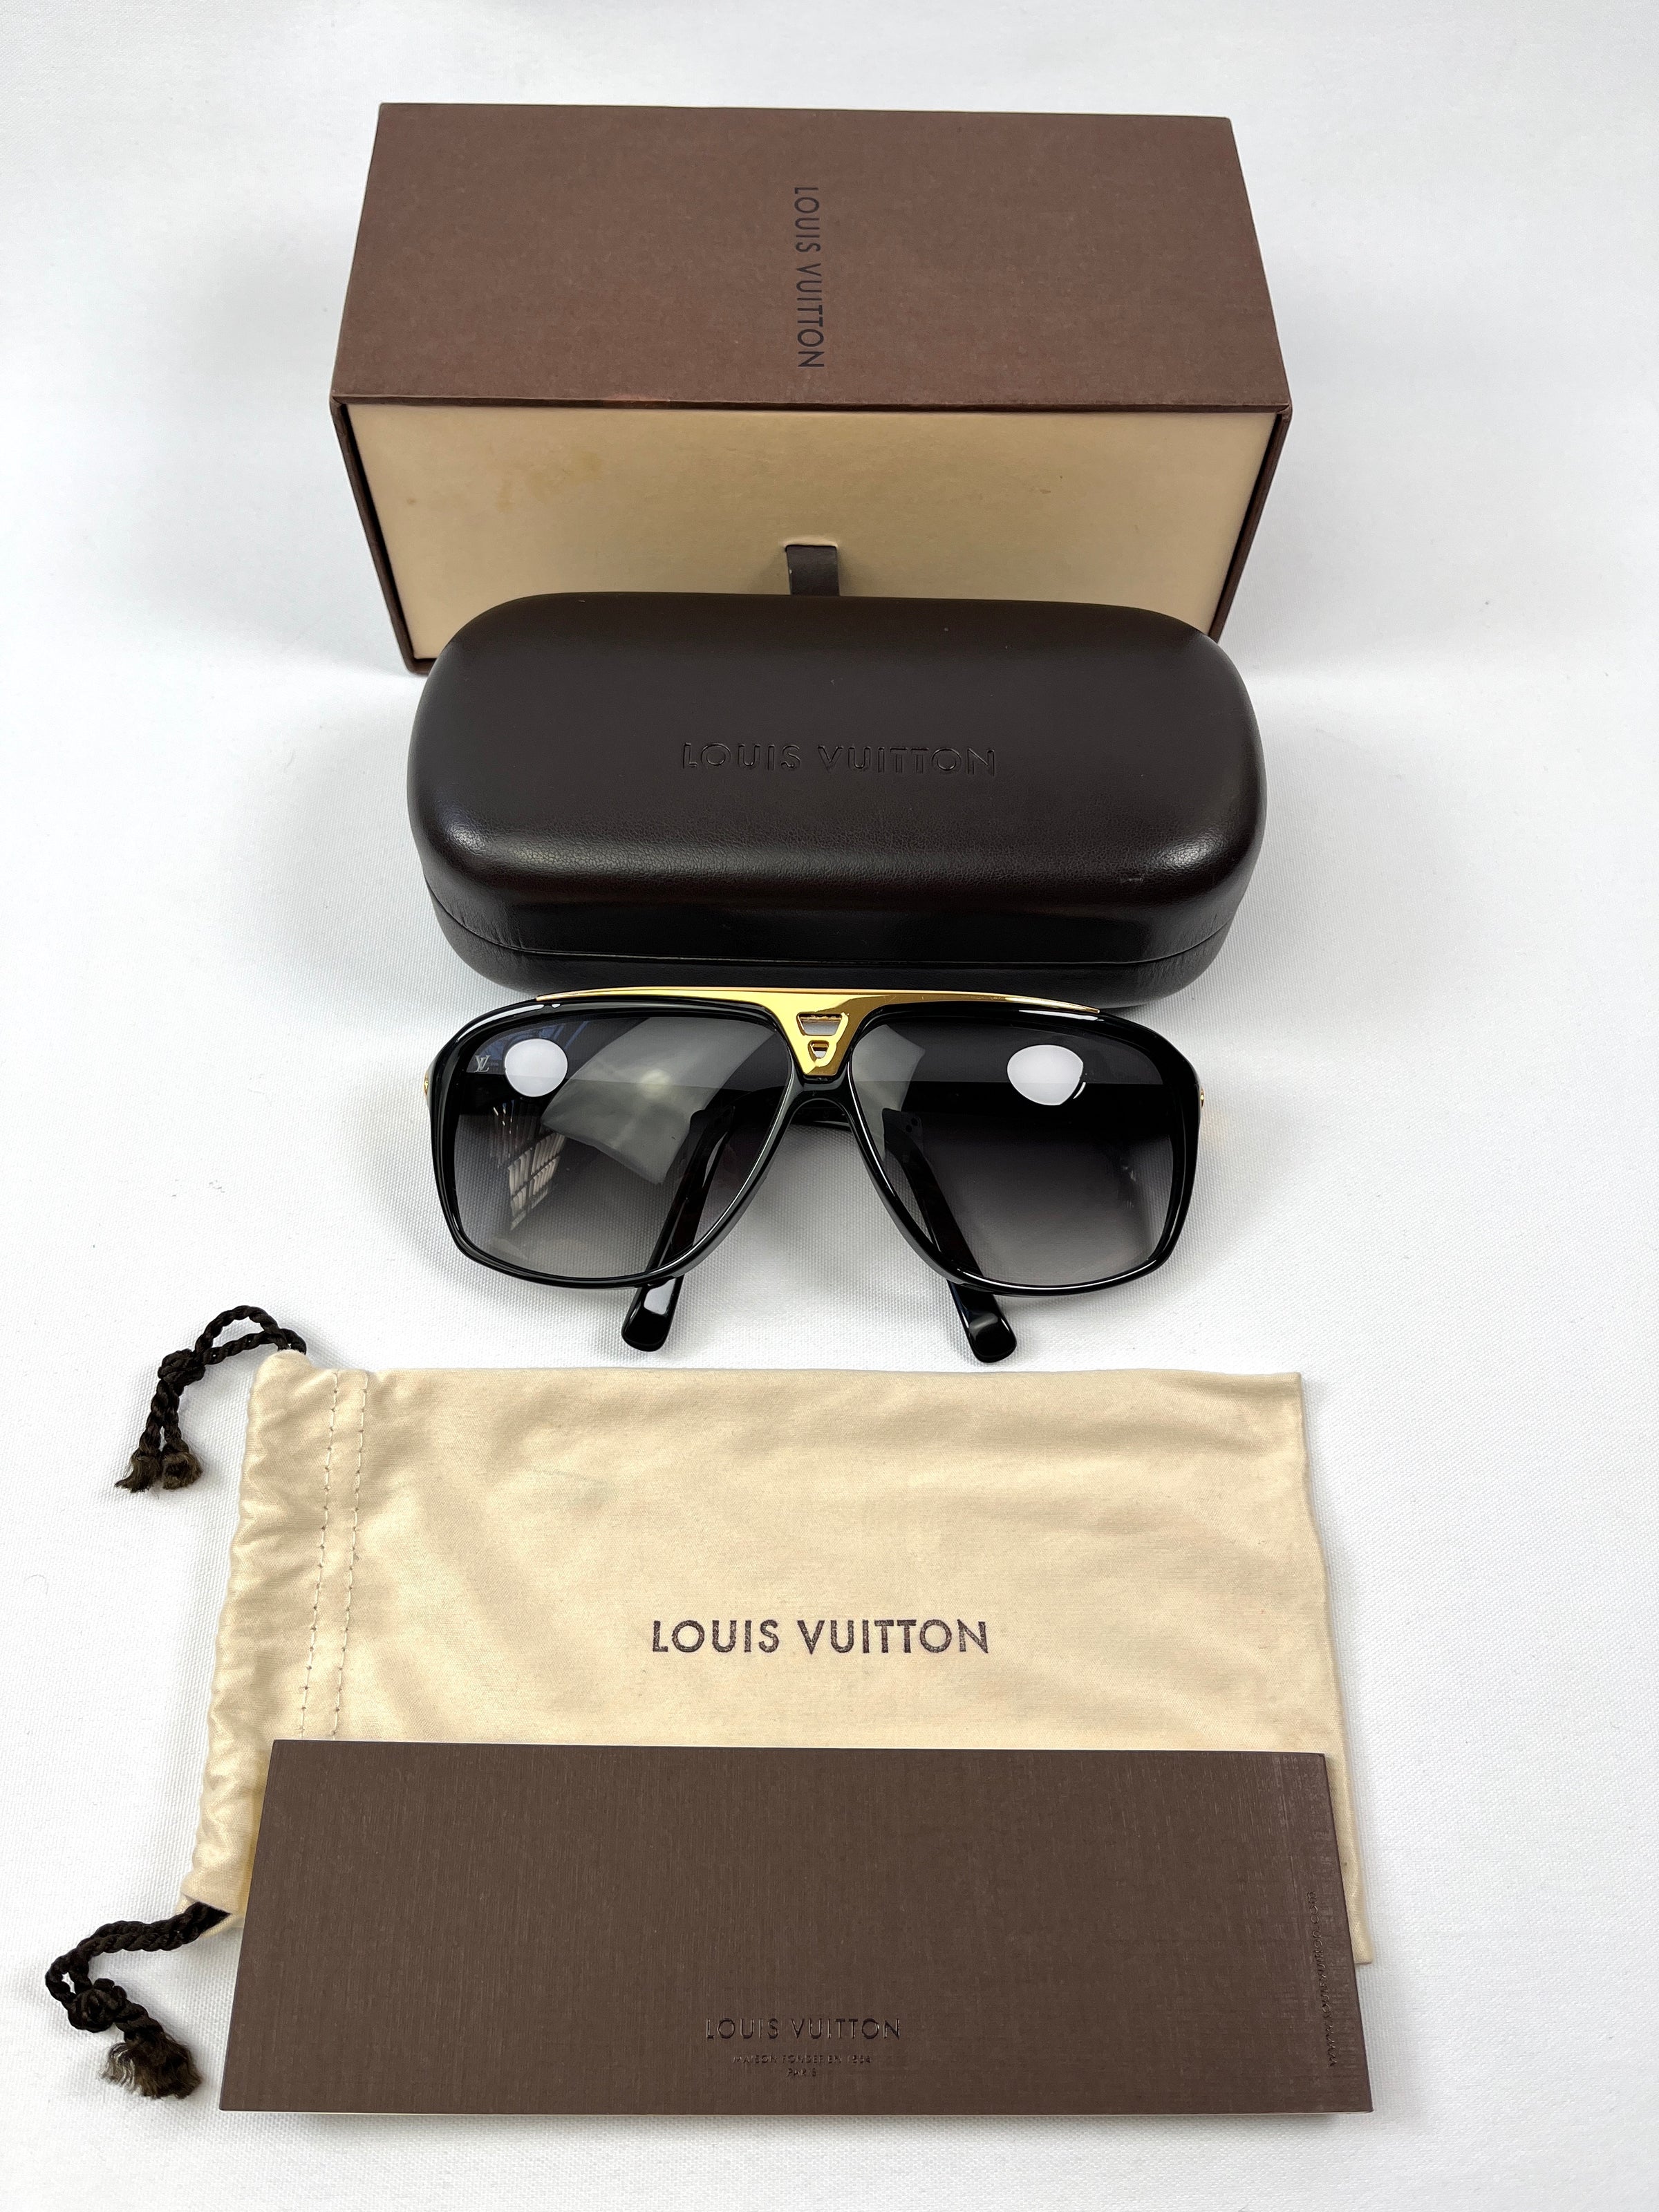 Louis Vuitton Millionaire Sunglasses Sunglasses, Limited in RED Details .:   * 100% AUTHENTIC GOODS - 100% WORRY-FREE * is Largest  Online Store and Retail Outlet in Australia to BUY, SELL, CONSIGN